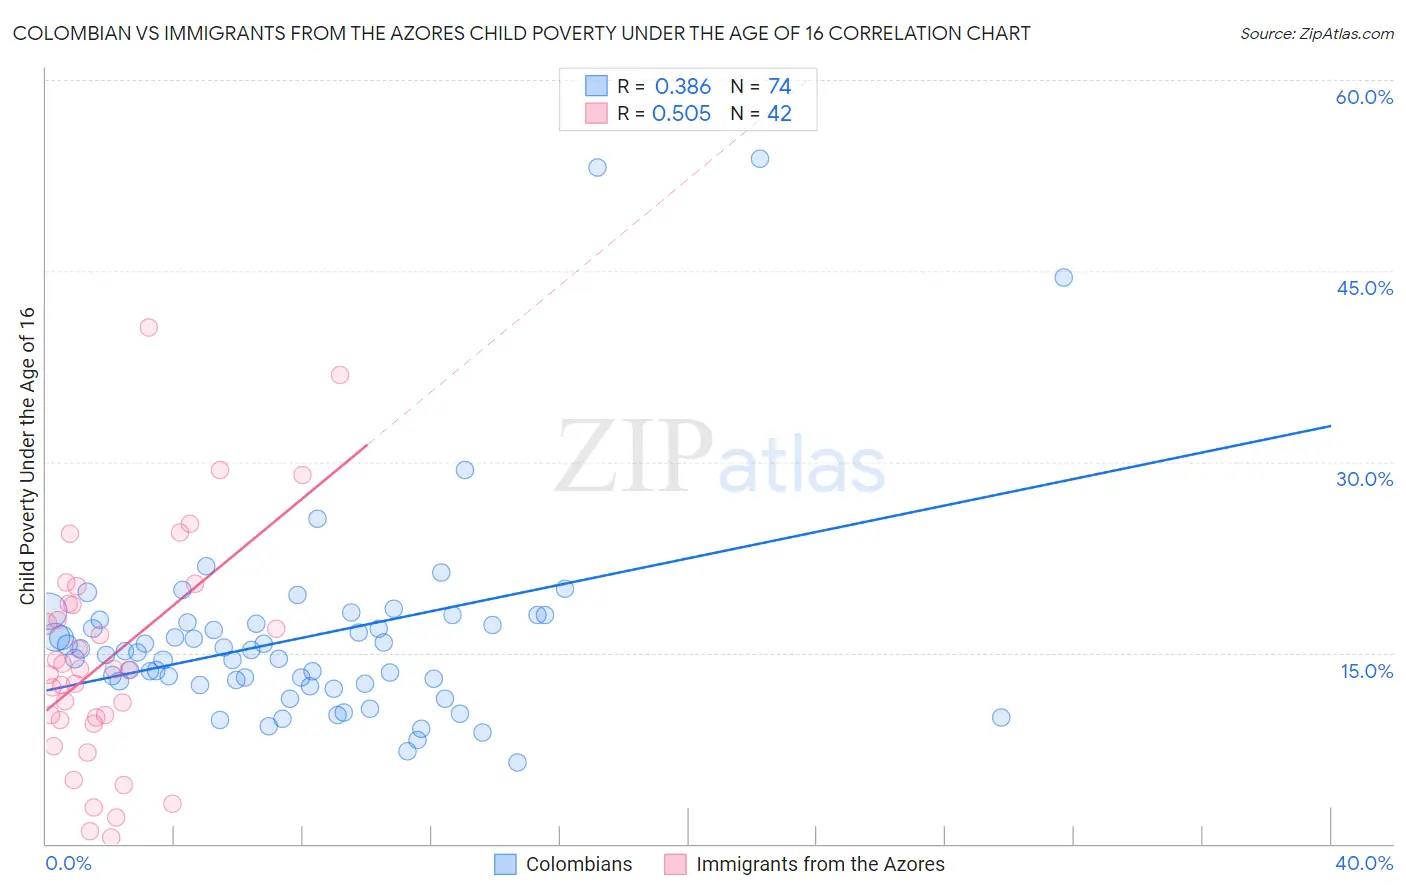 Colombian vs Immigrants from the Azores Child Poverty Under the Age of 16